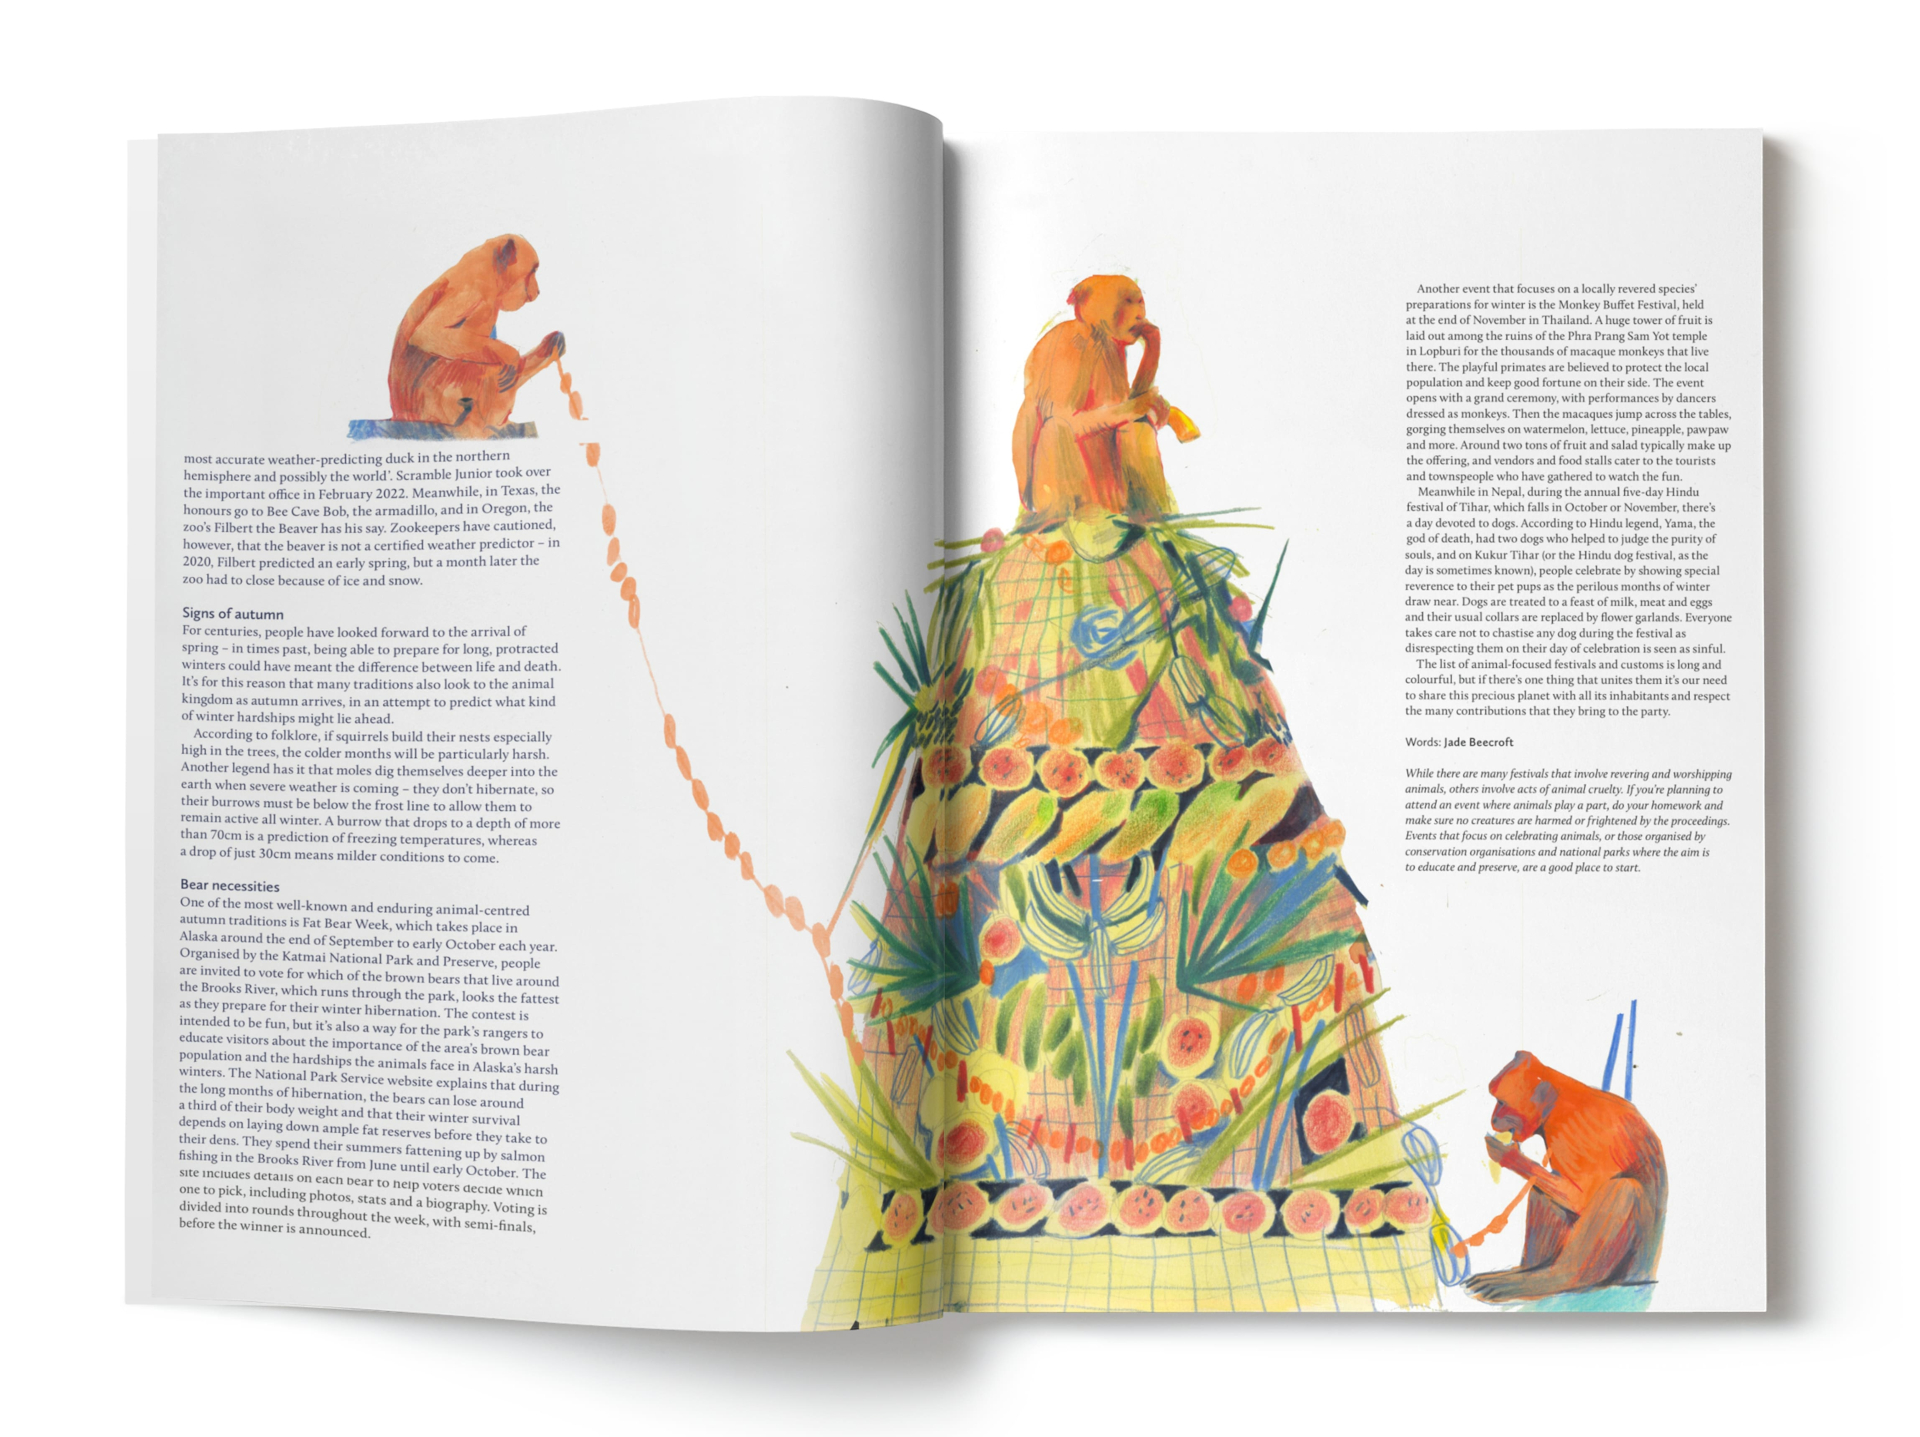 “Magical Creatures” editorial. Redesigning a spread from “Breathe” magazine about celebrations and festivals around the world that focus on animals.